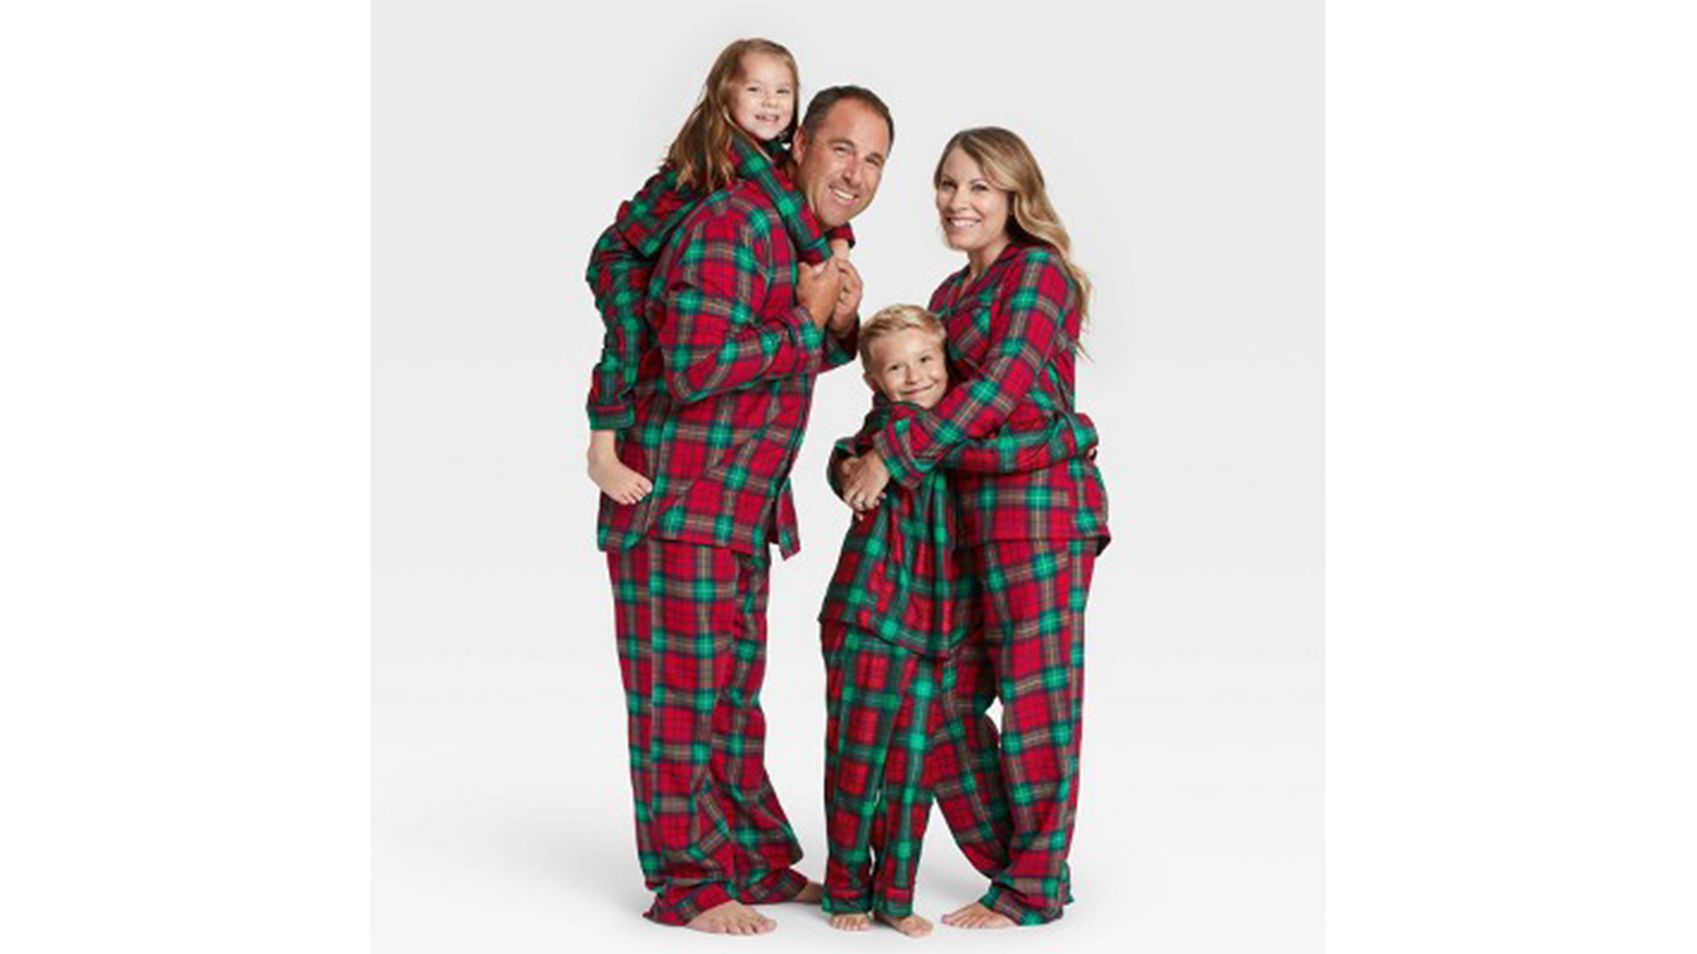 Soma Stretch Flannel Set, Plaid, Pink & Black, size XXL, Christmas Pajamas  by Soma, Gifts For Women